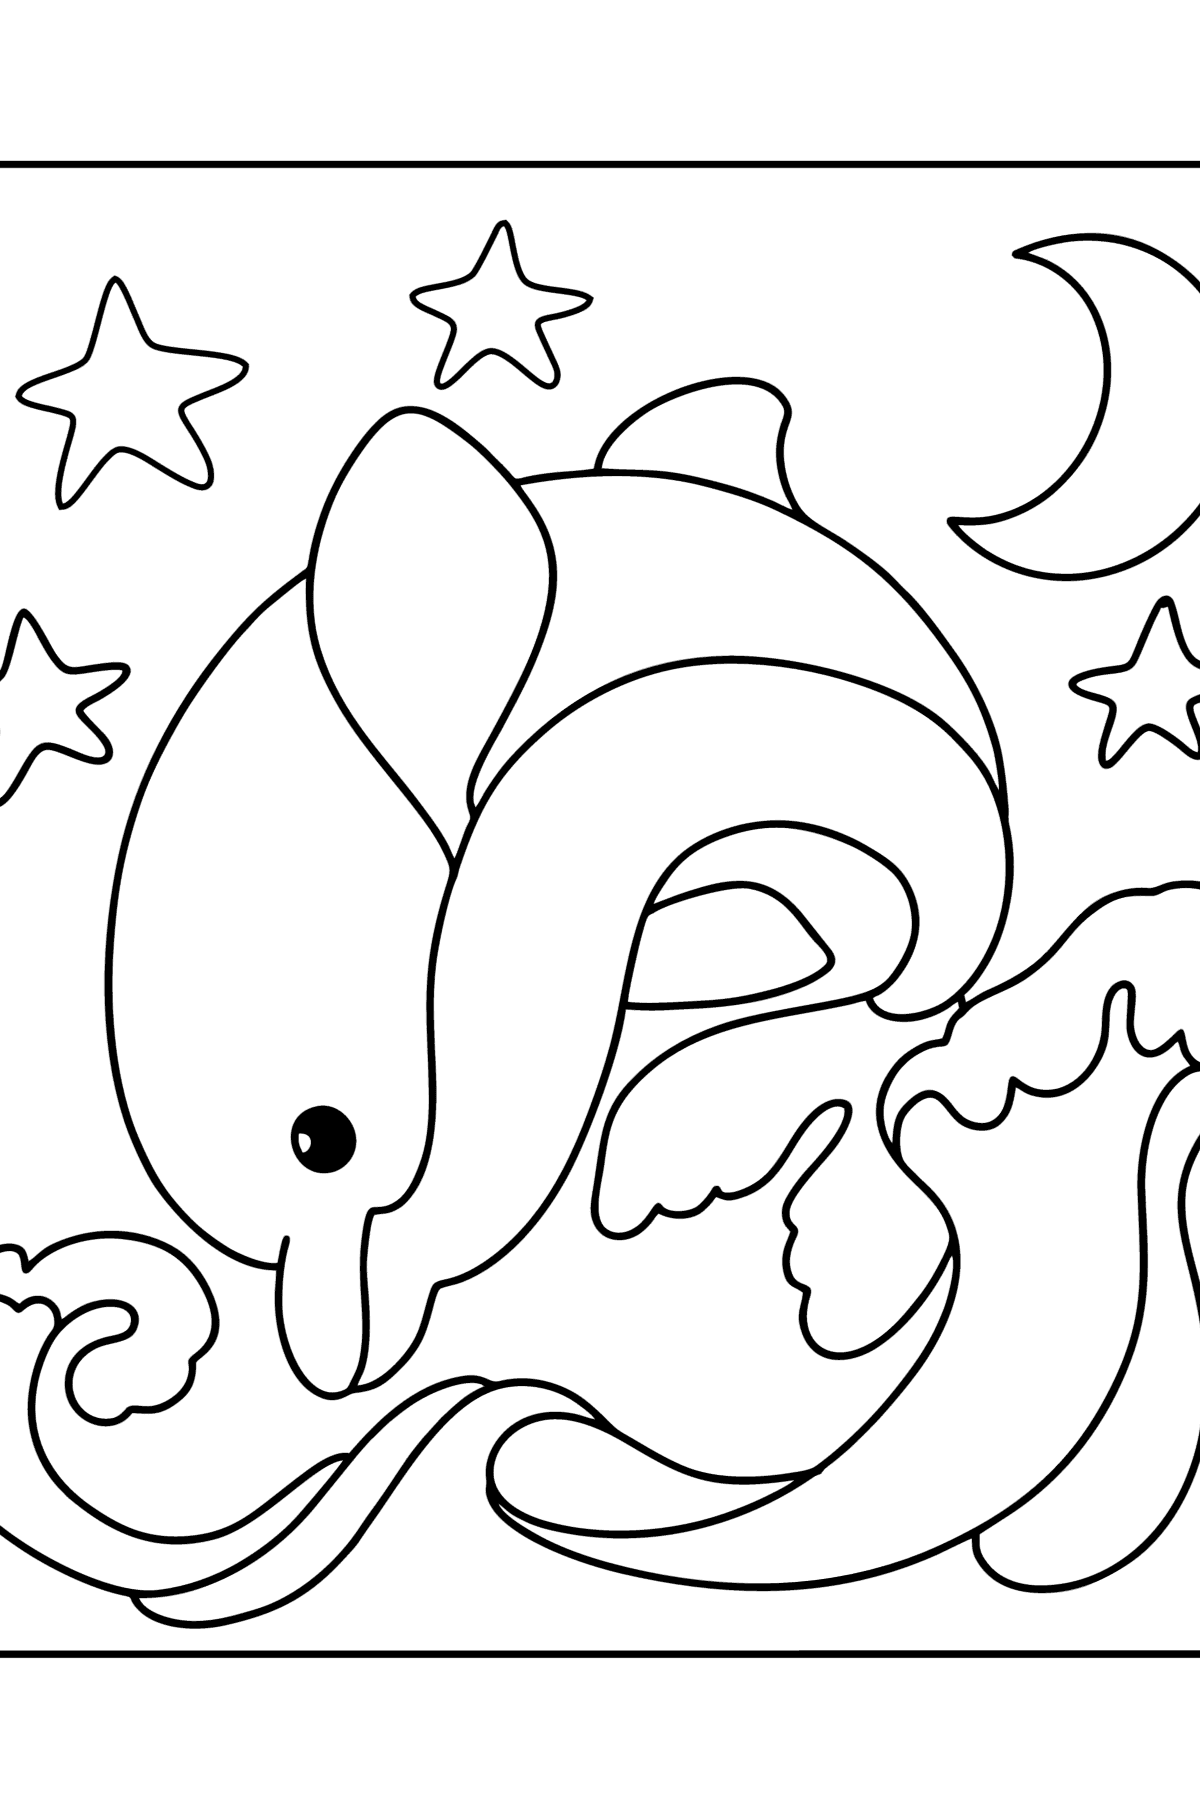 Dolphin in the Sea coloring page - Coloring Pages for Kids